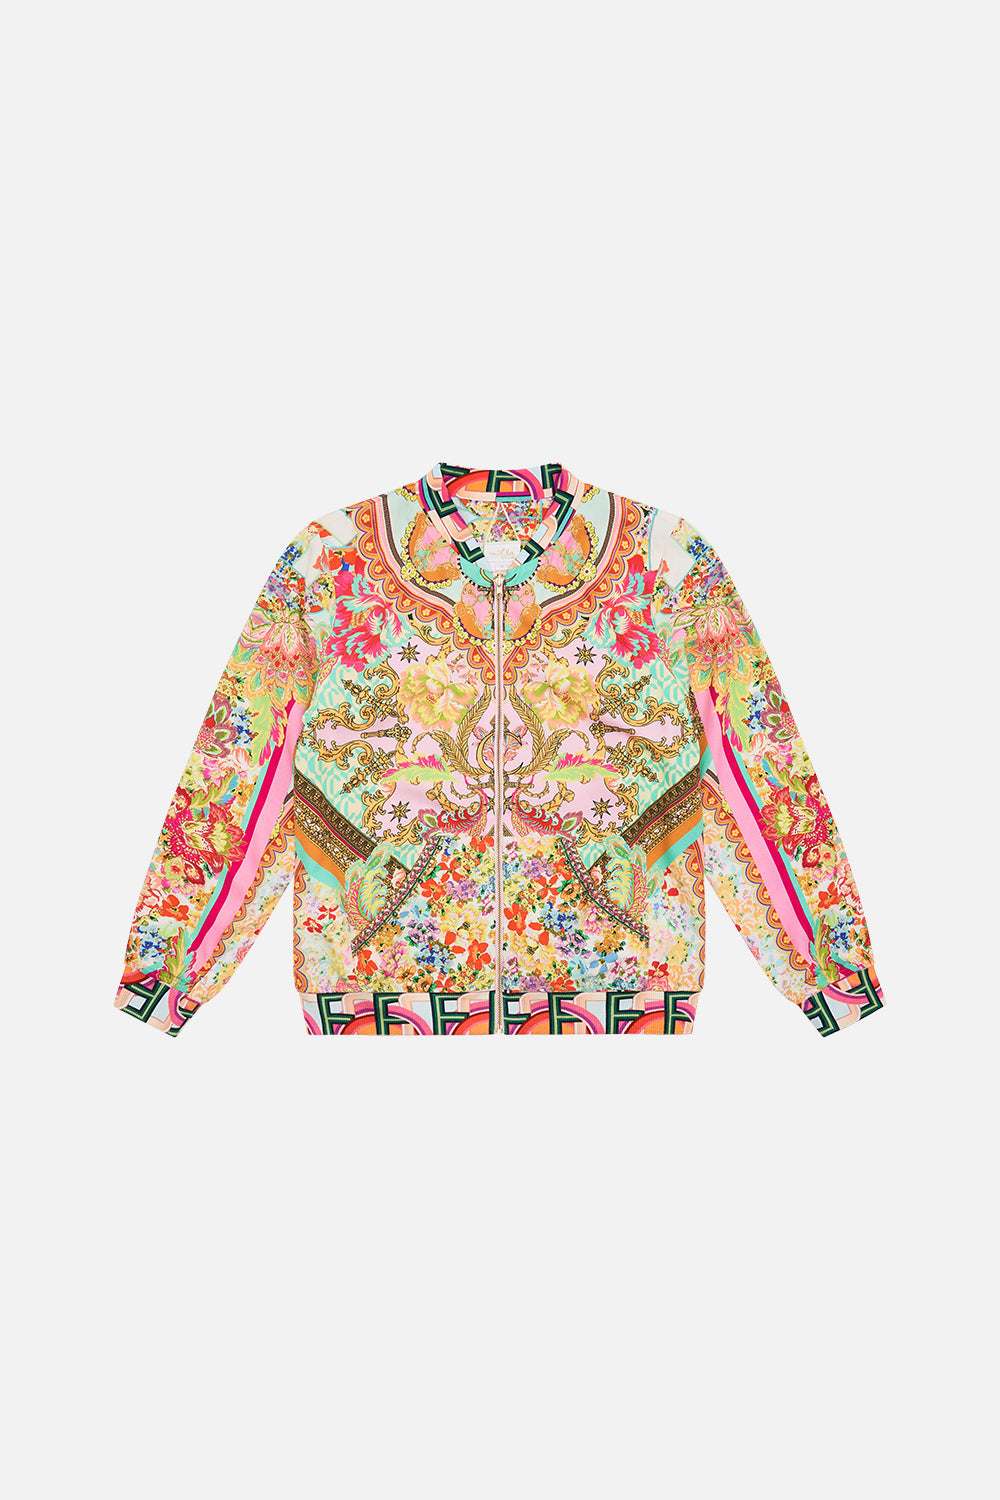 Product view of MILLA BY CAMILLA kids bomber jacket in An Italian Welcome print 